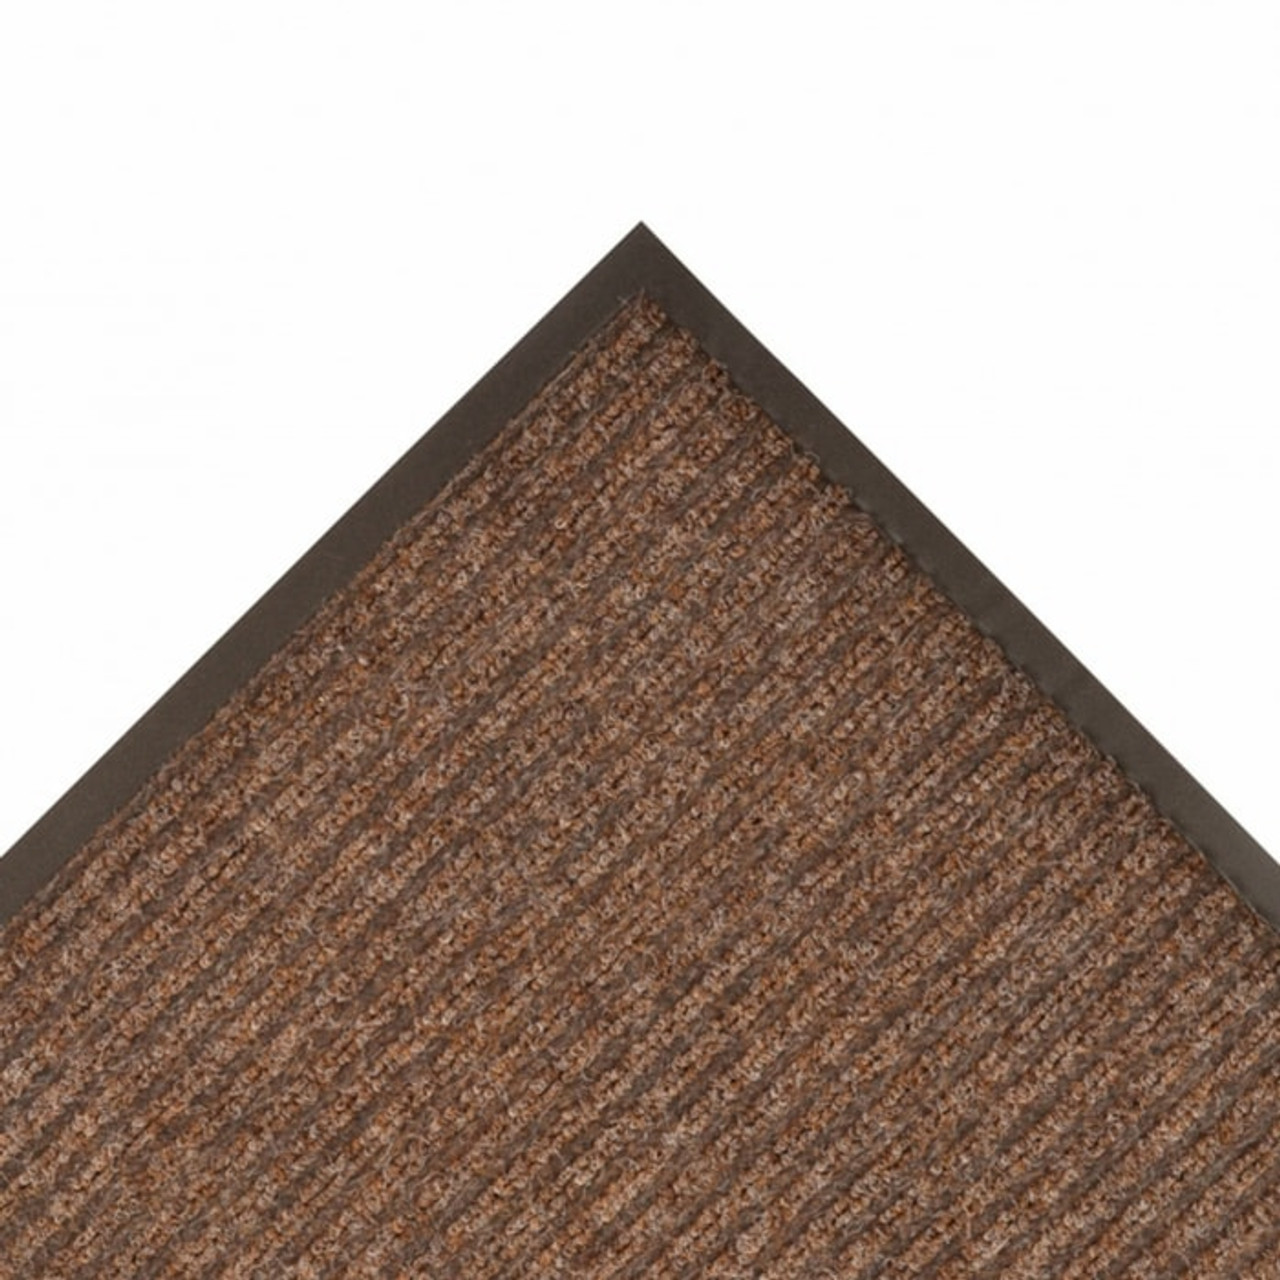 Notrax 109 Brush Step Entrance Mat - 3' x 4' - 109S0034BR, Brown